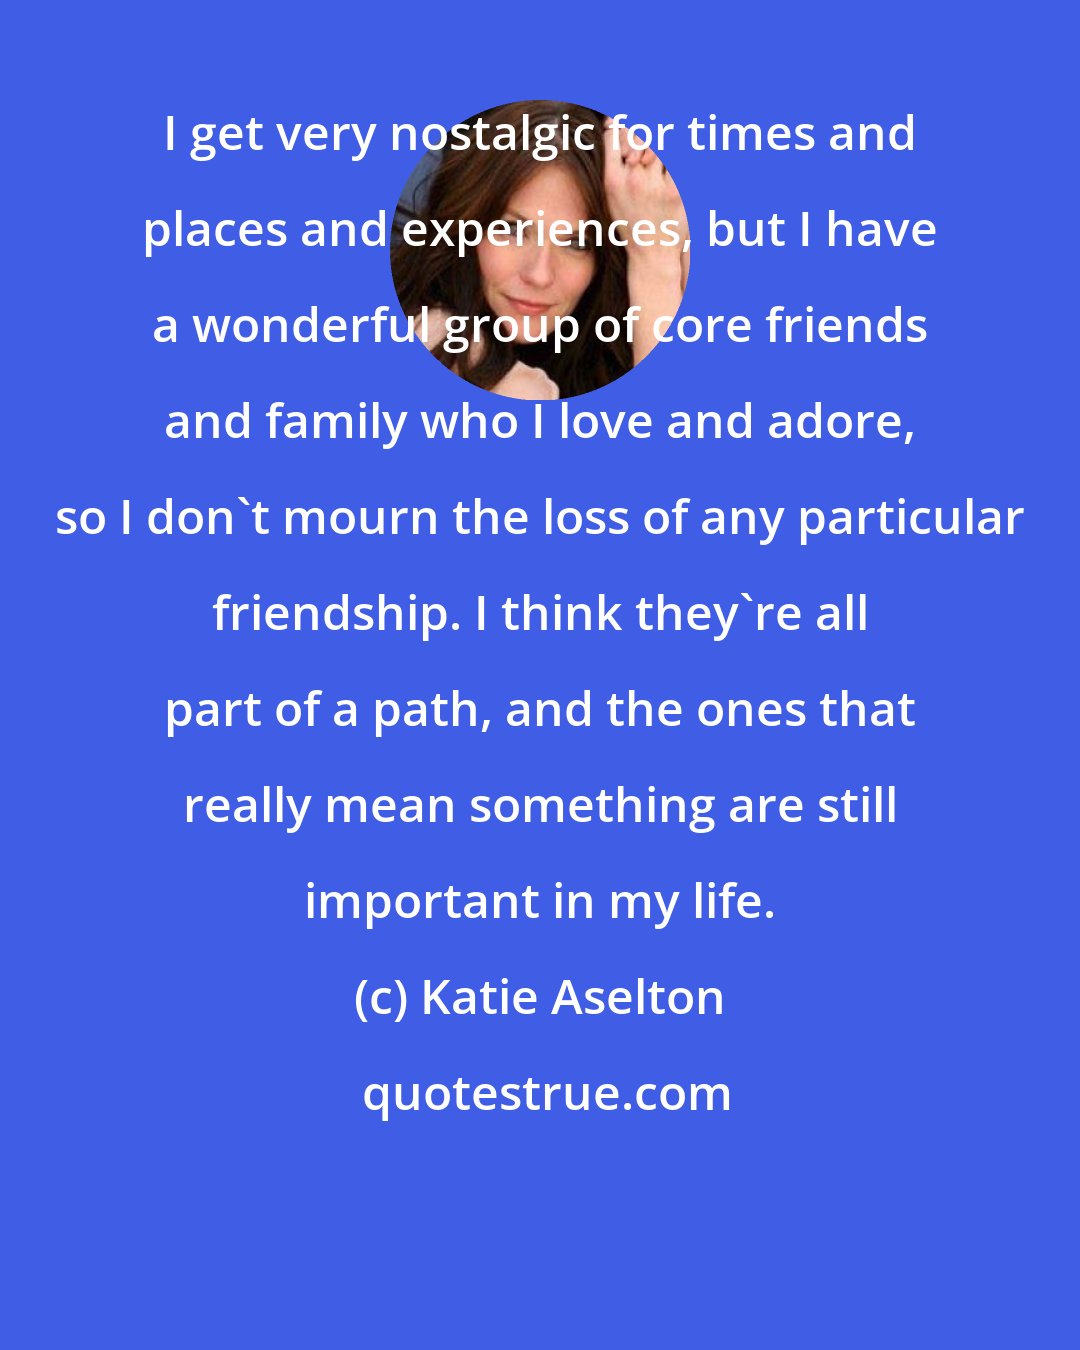 Katie Aselton: I get very nostalgic for times and places and experiences, but I have a wonderful group of core friends and family who I love and adore, so I don't mourn the loss of any particular friendship. I think they're all part of a path, and the ones that really mean something are still important in my life.